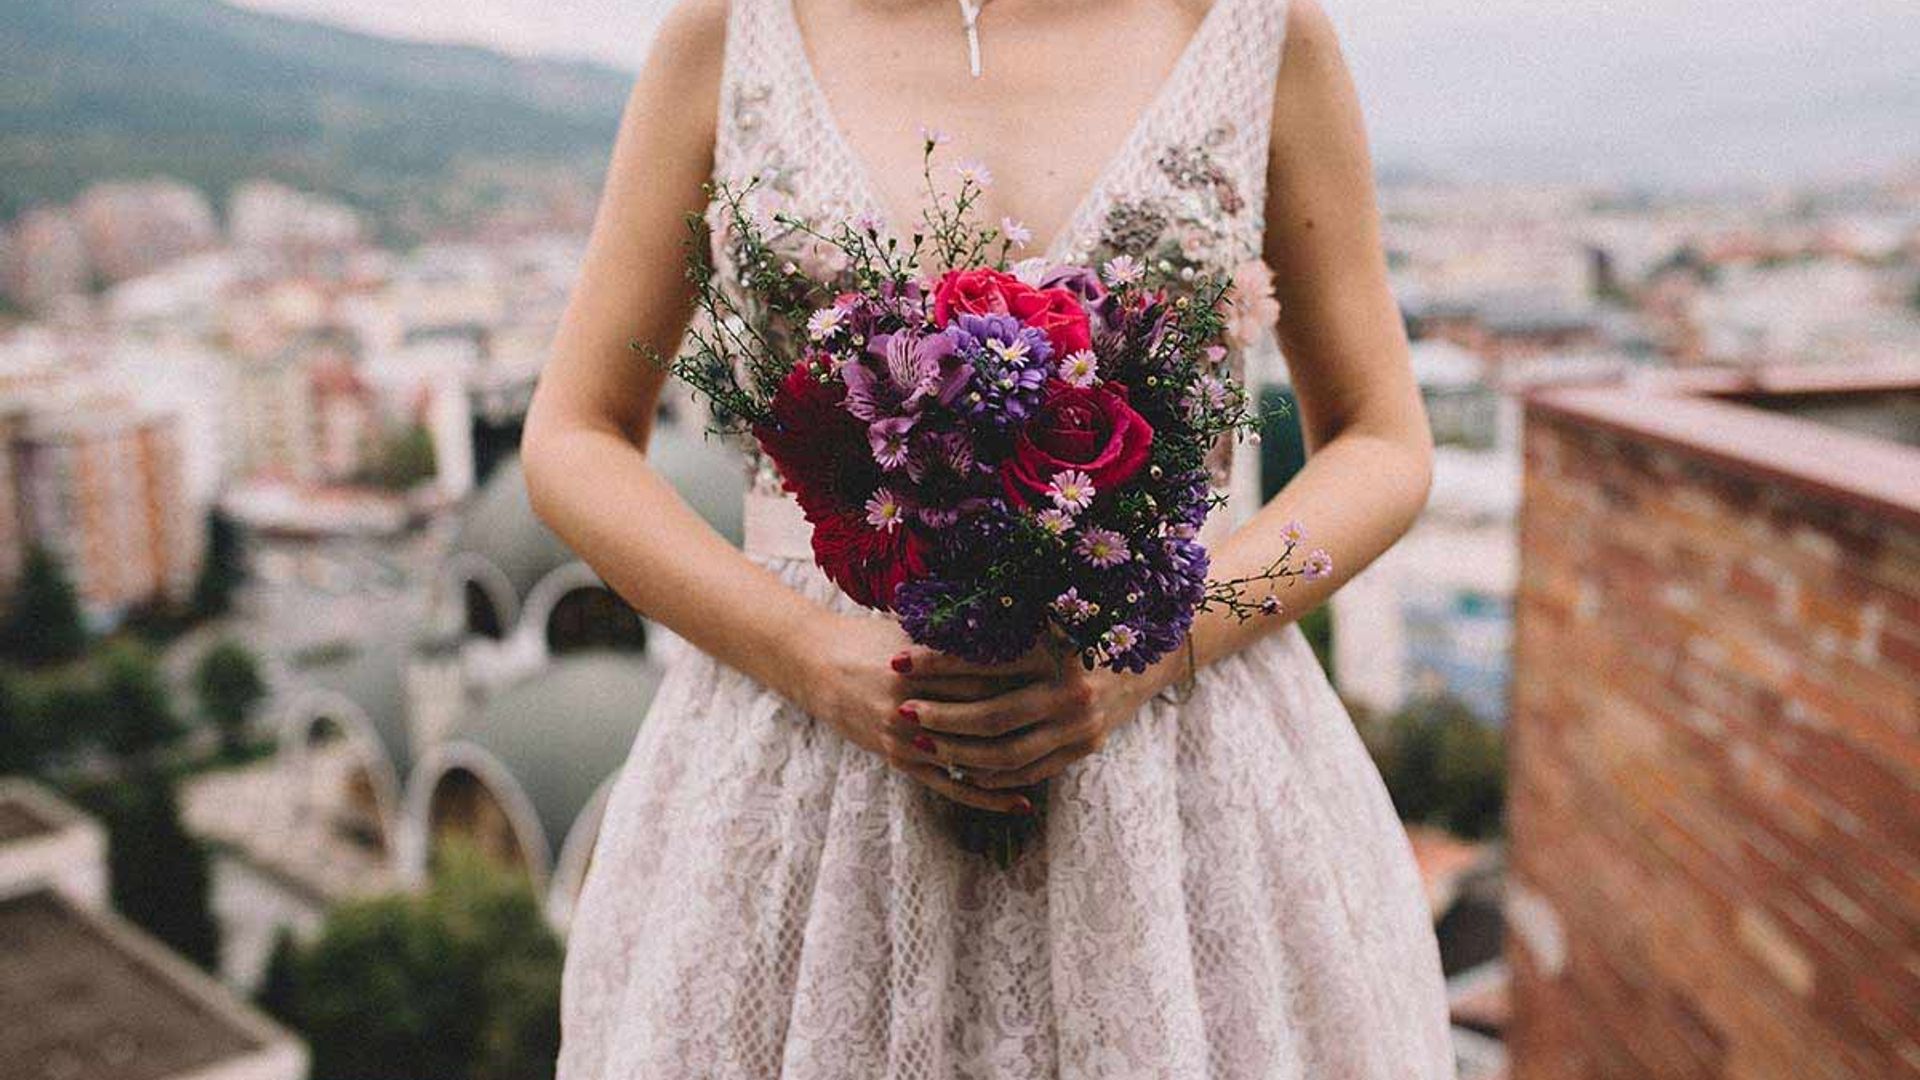 Bridal jumpsuits, dried flowers & hay bale seating – the 2020 wedding trends brides need to know